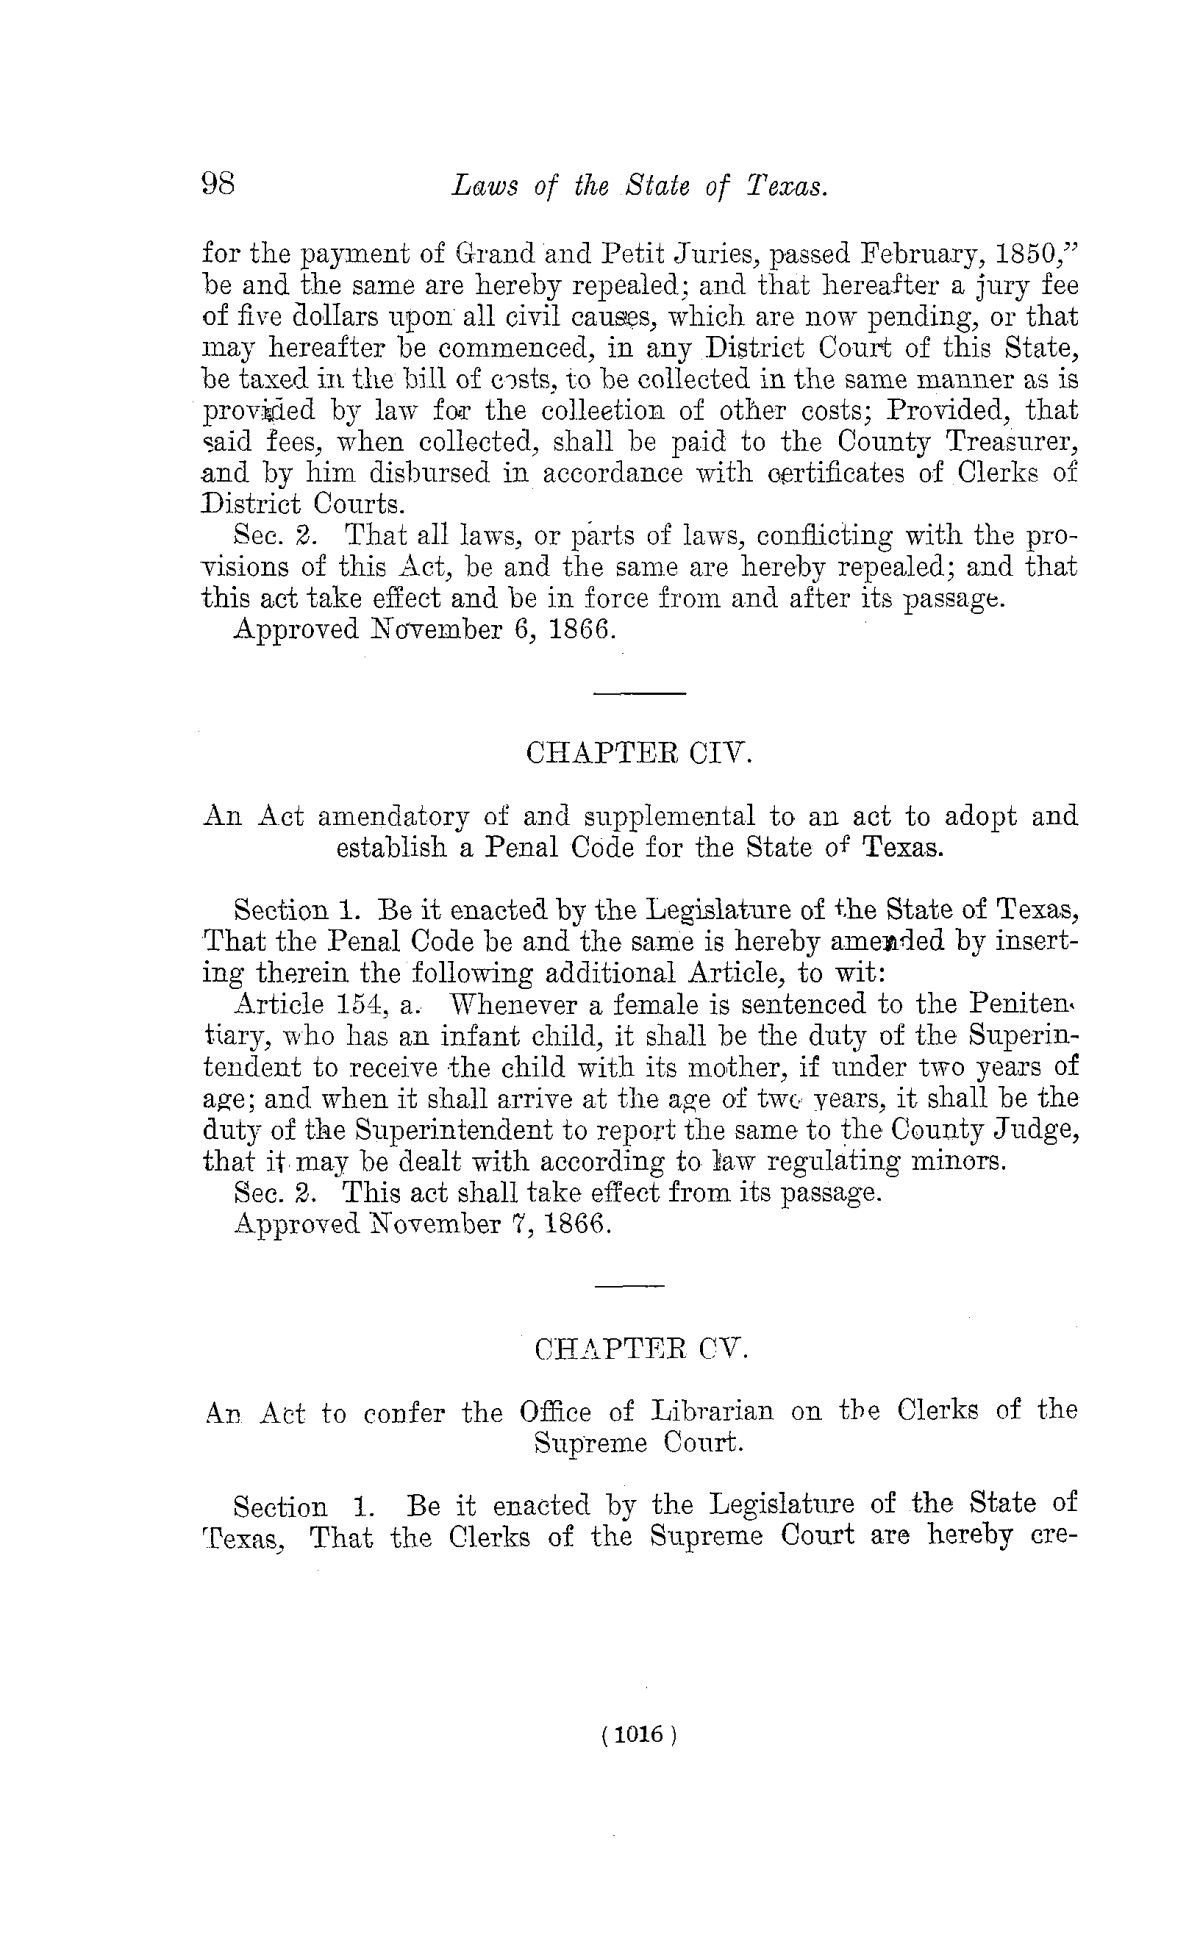 The Laws of Texas, 1822-1897 Volume 5
                                                
                                                    1016
                                                